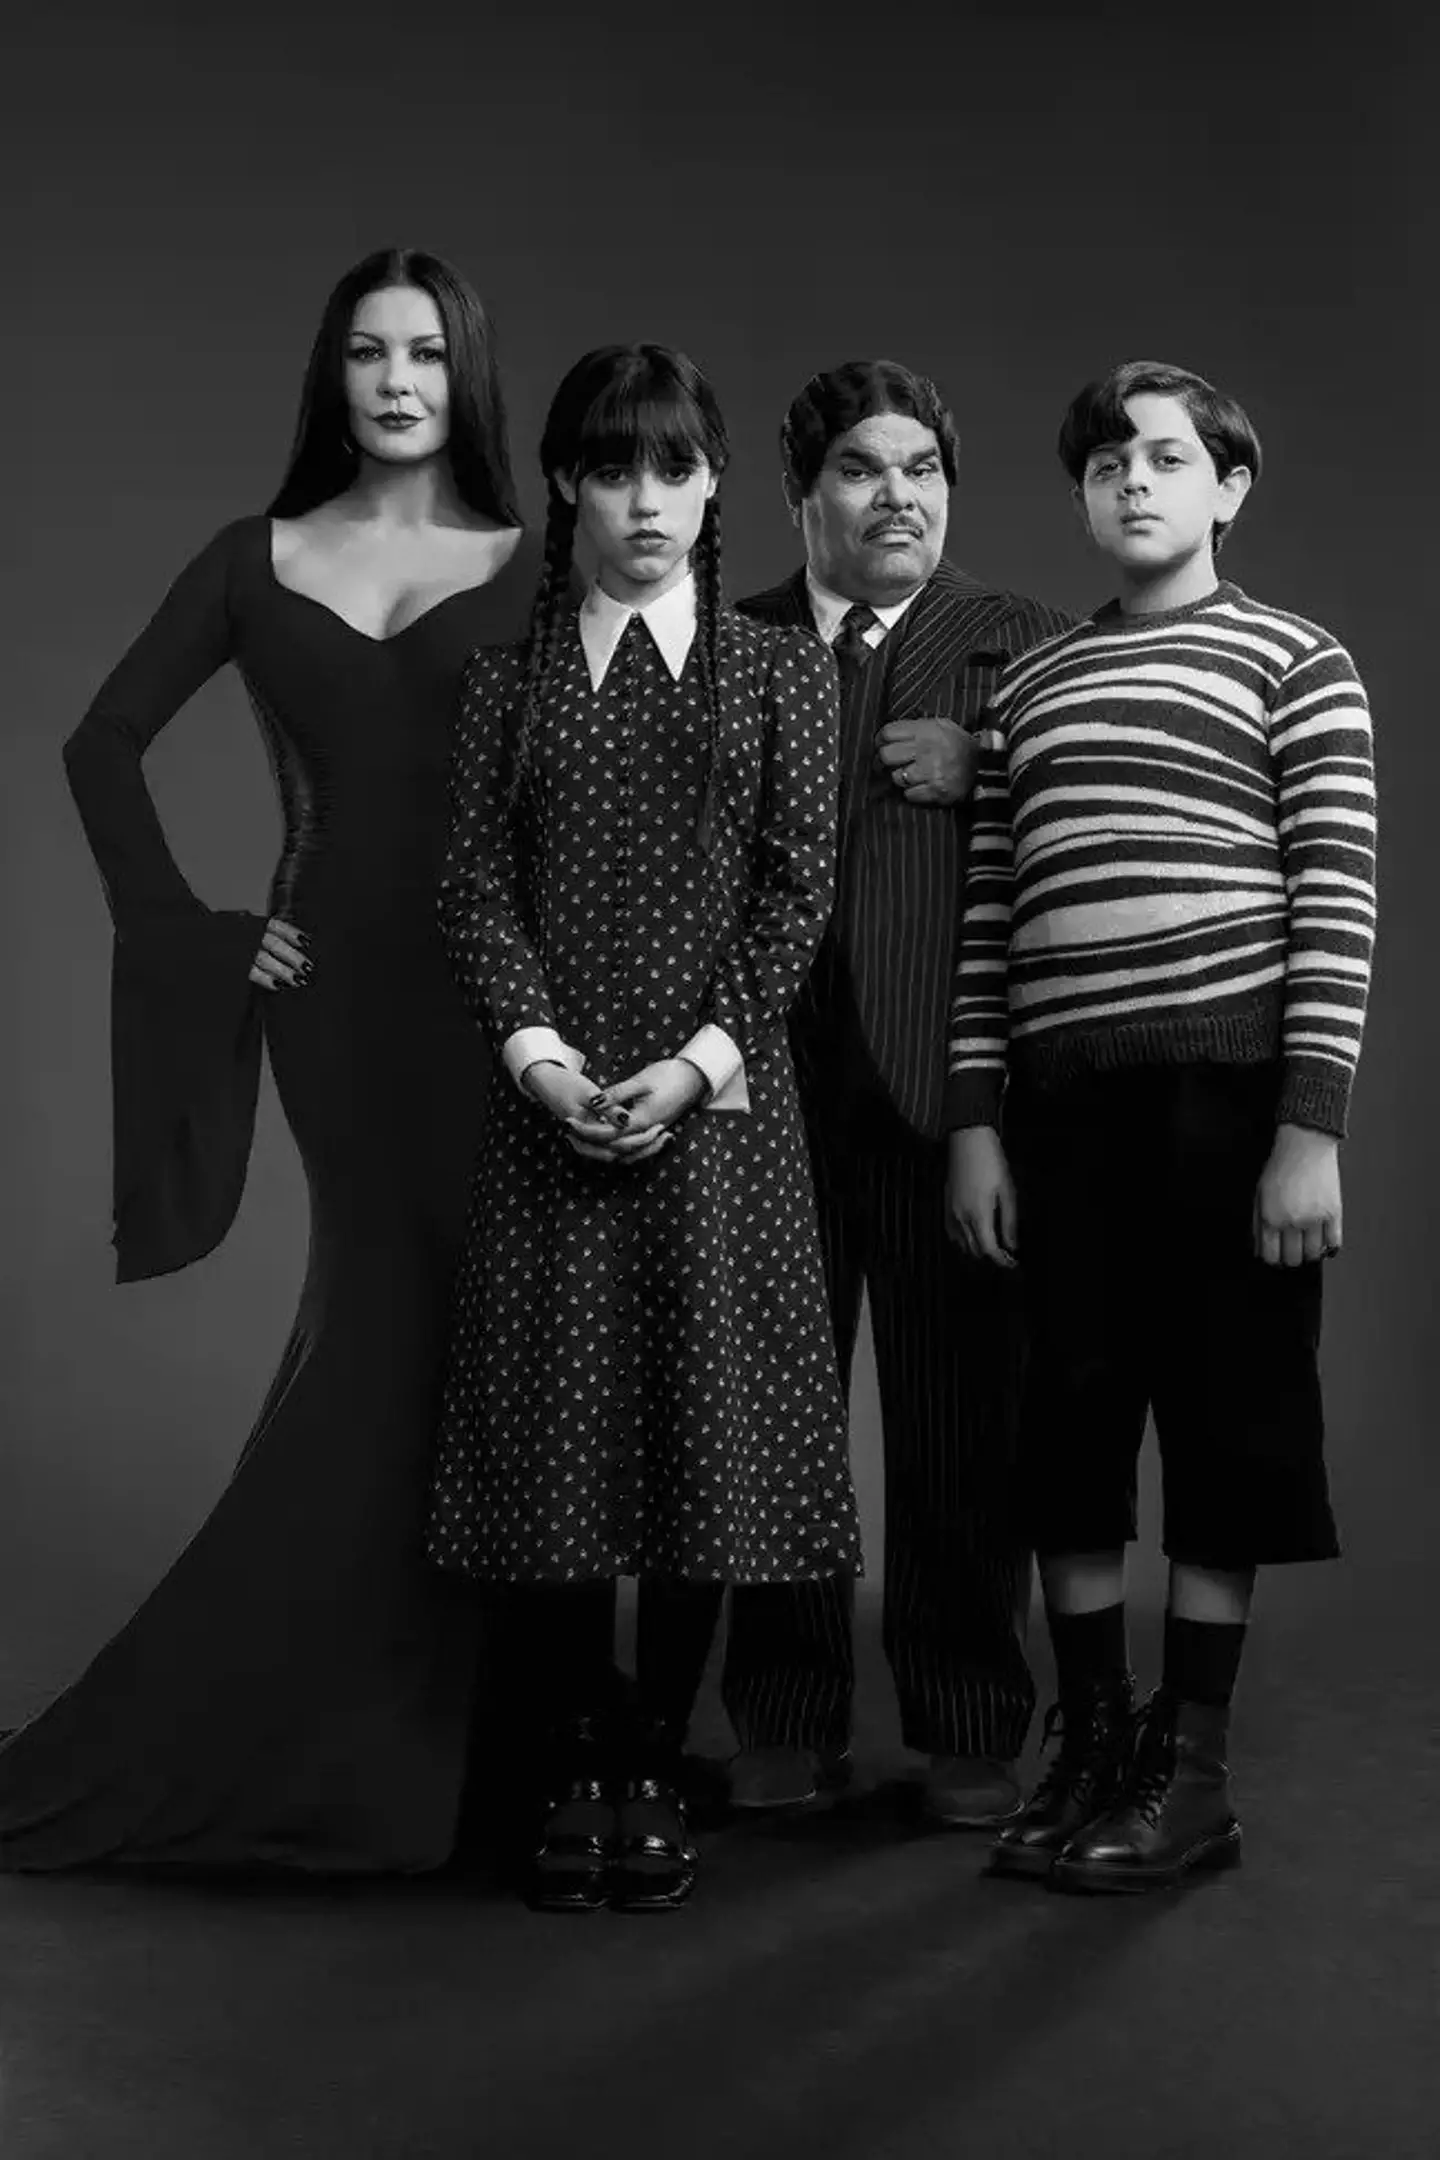 The Addams family are back!